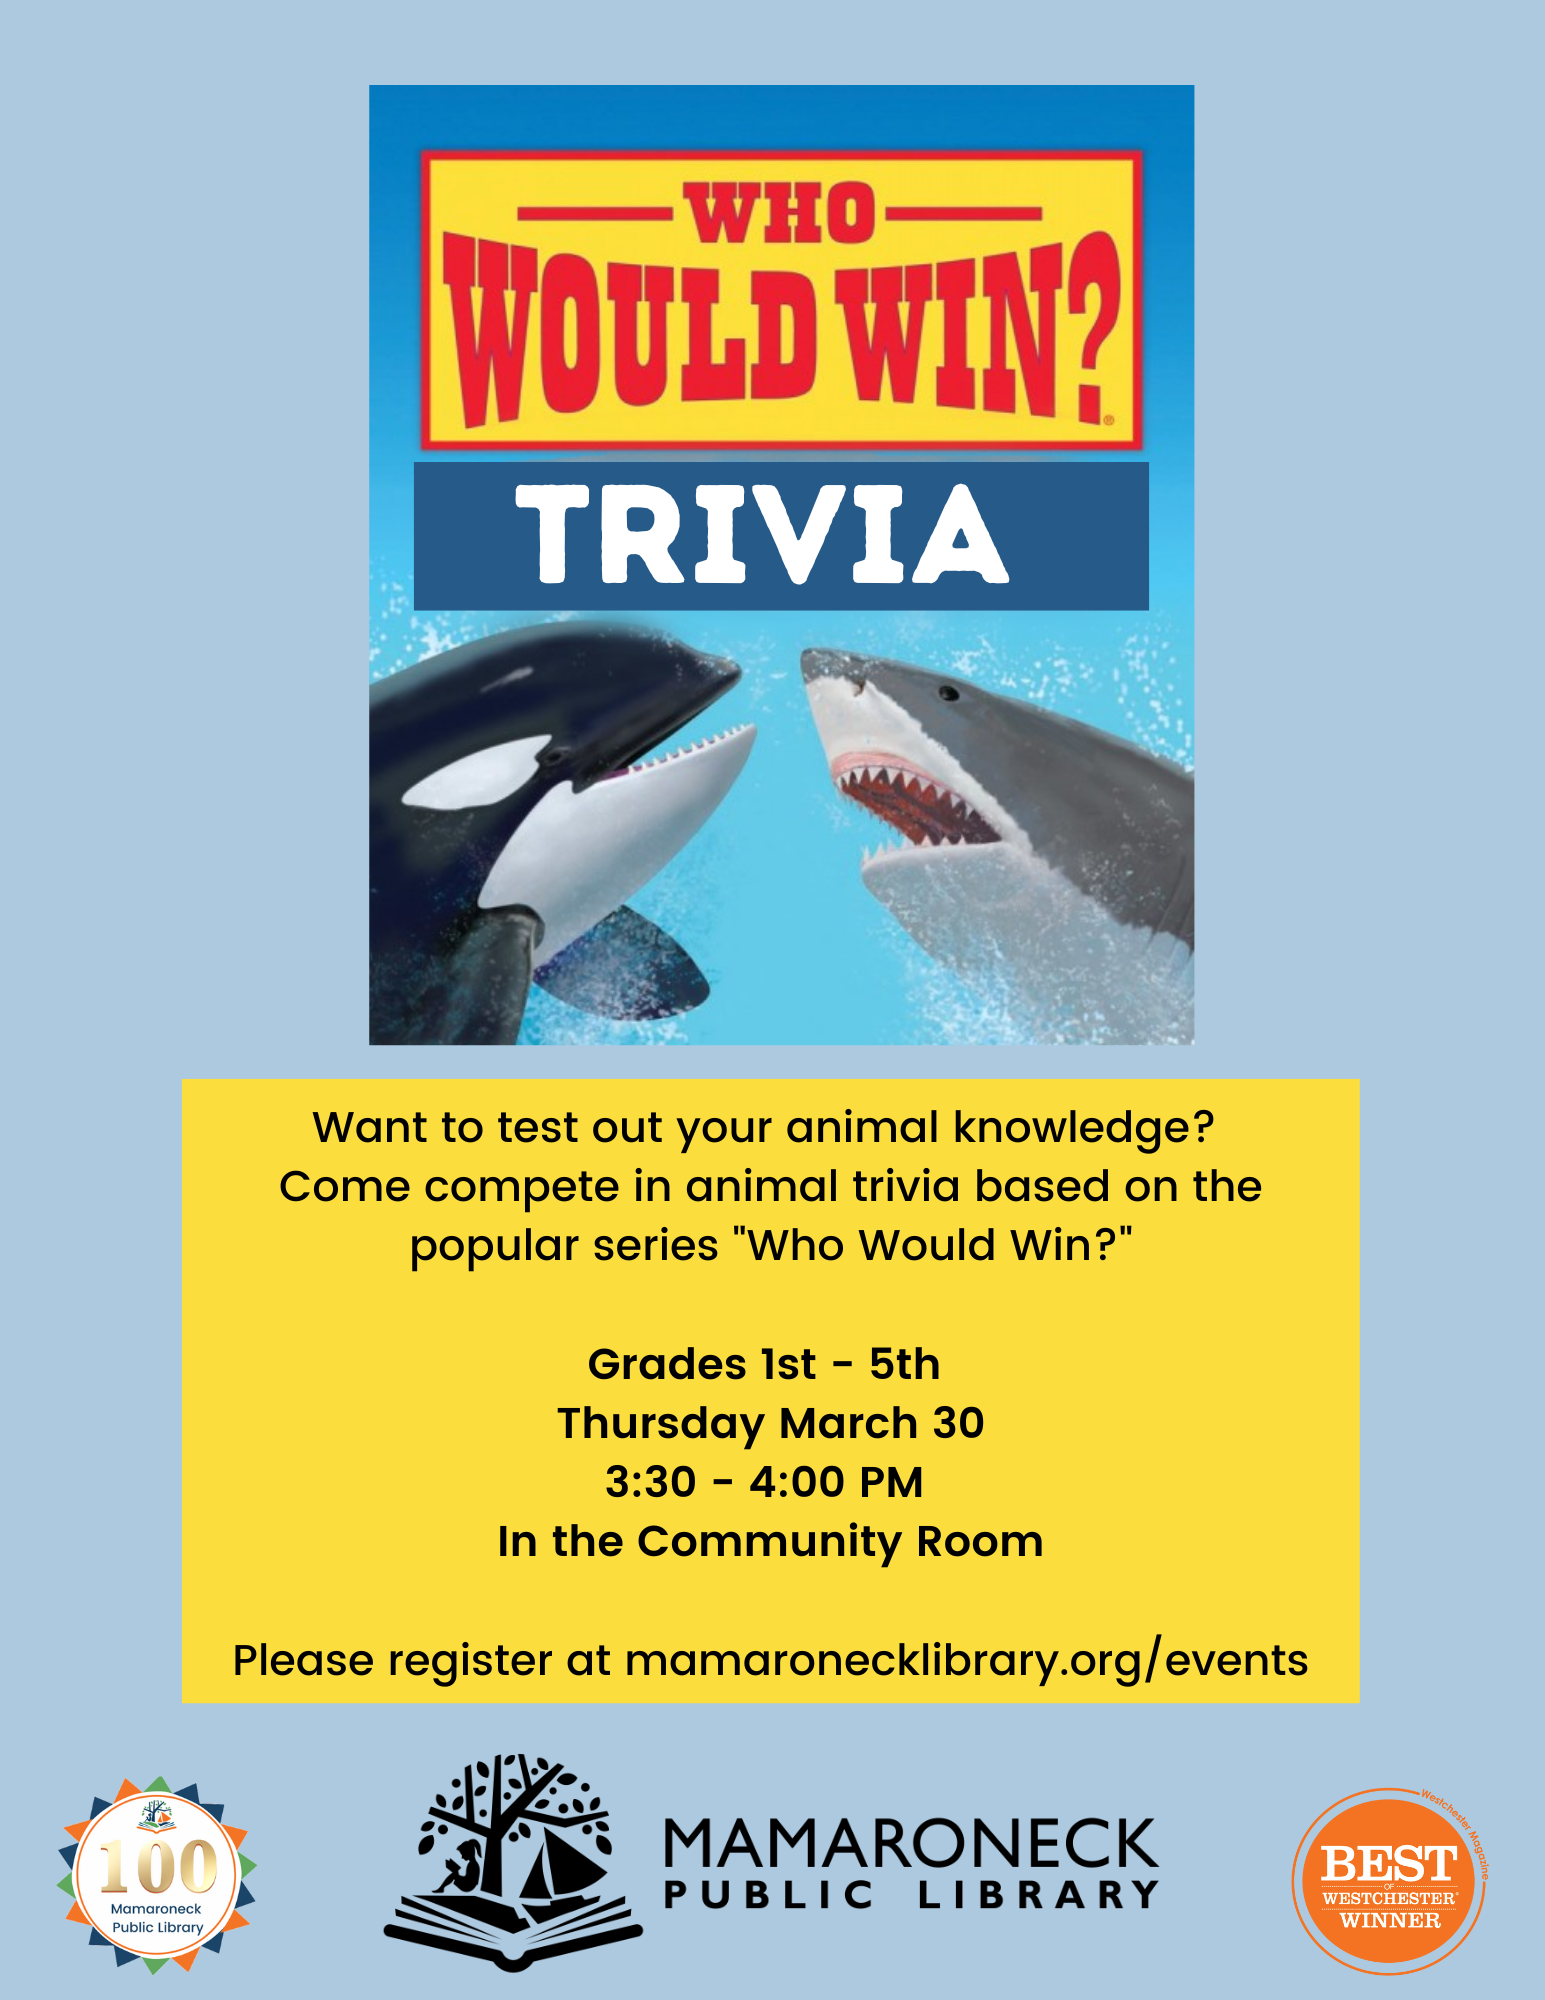 3/30 @ 3:30 - 4pm in the Community Room. Who Would Win? Trivia game for children grades 1-5